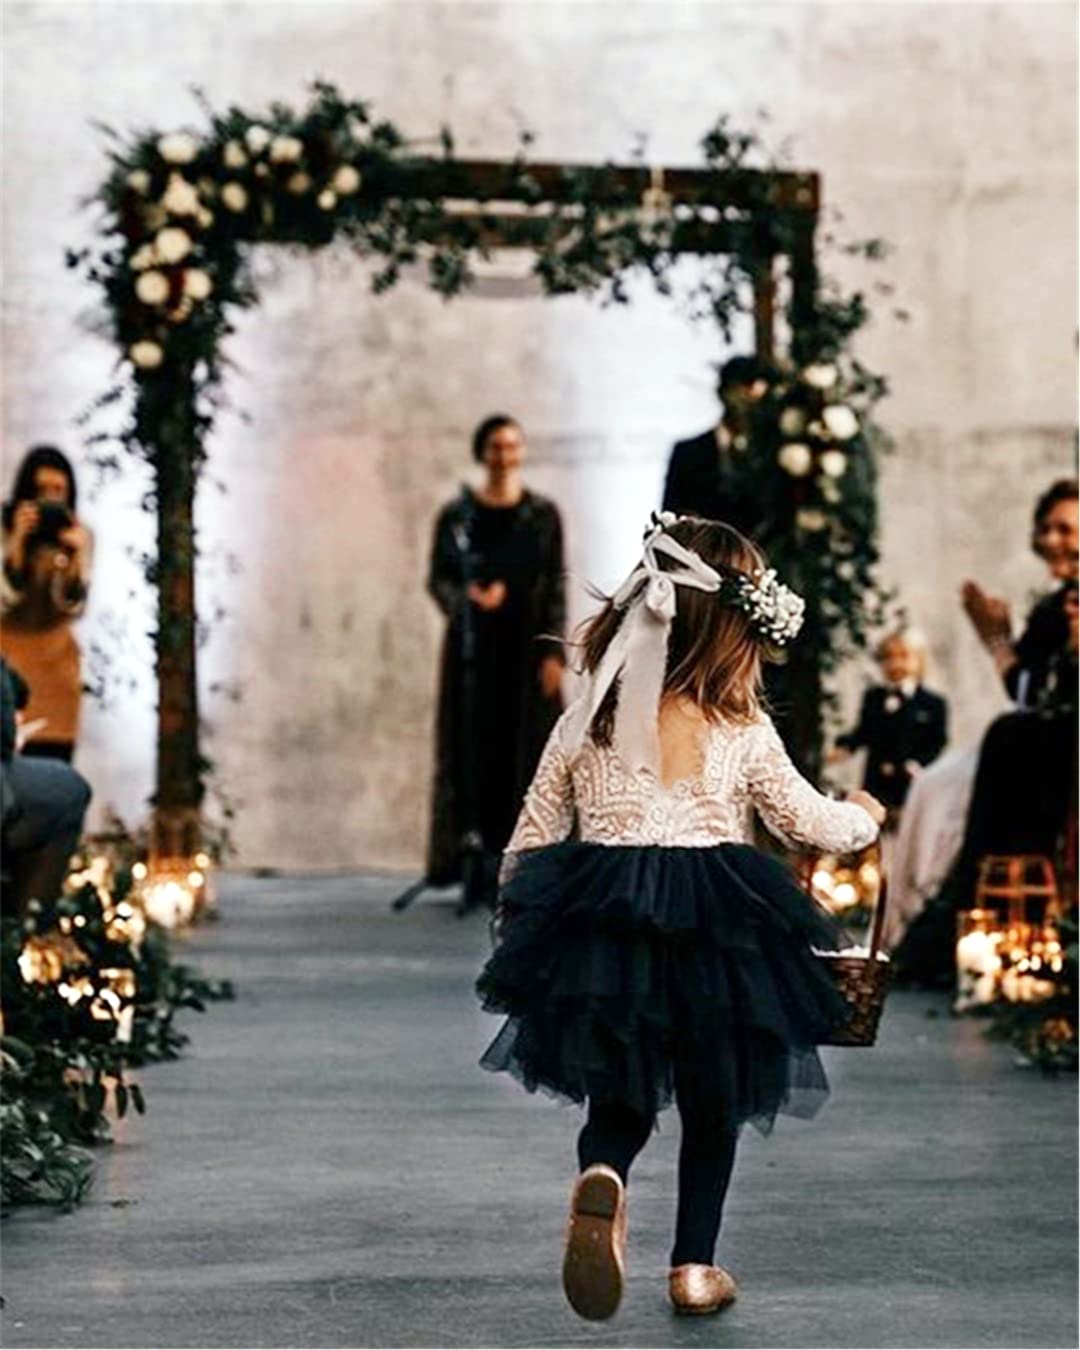 2Bunnies Flower Girl Dress Peony Lace Back A-Line Long Sleeve Tiered Tulle Short (Navy) - 2BUNNIES